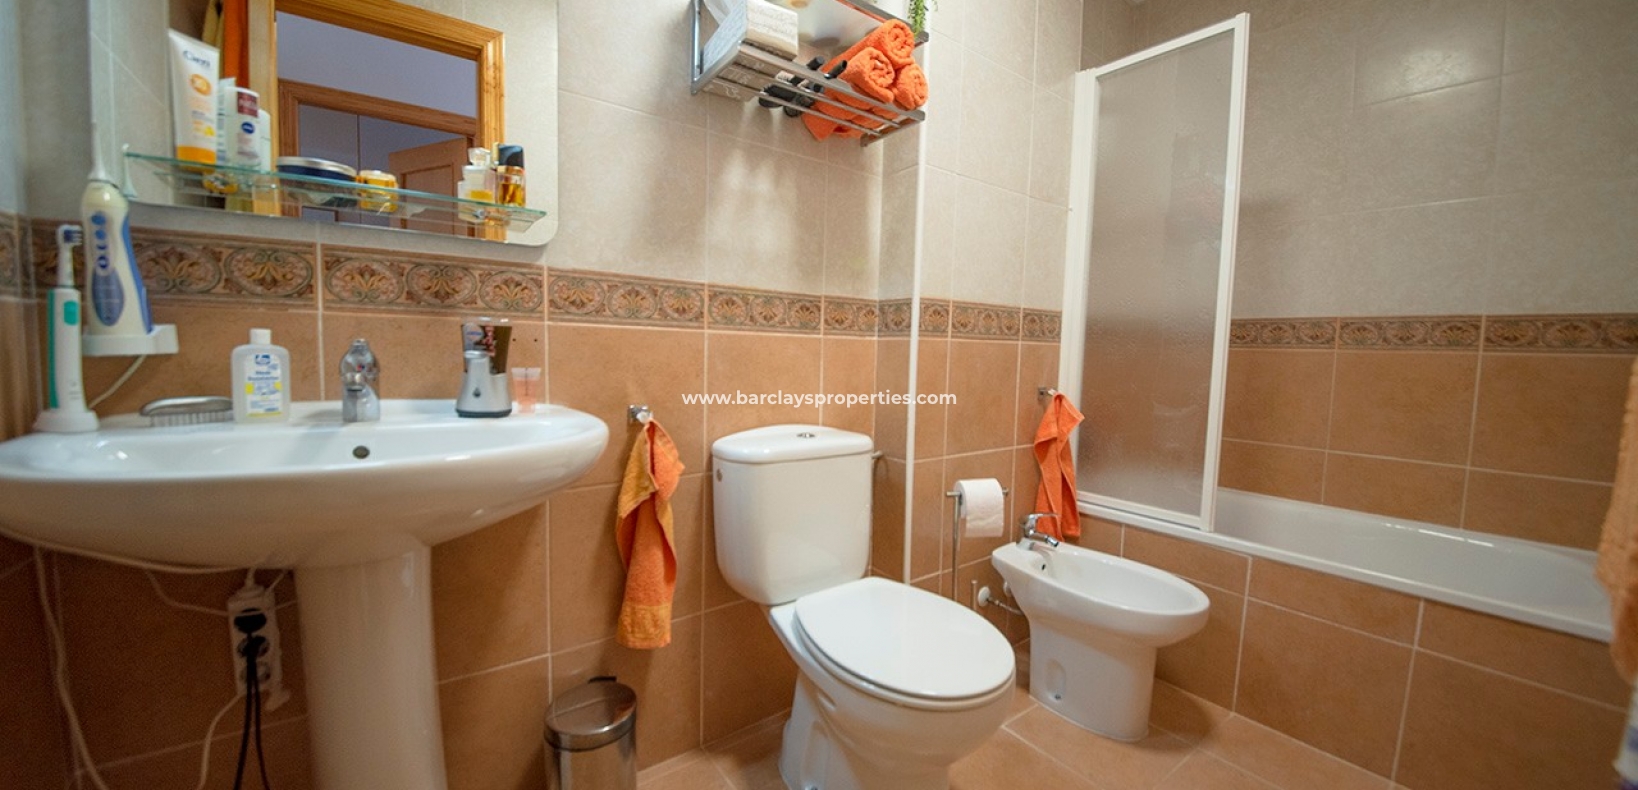 Town House Style Property for Sale in La Marina, Alicante Spain. - bathroom 